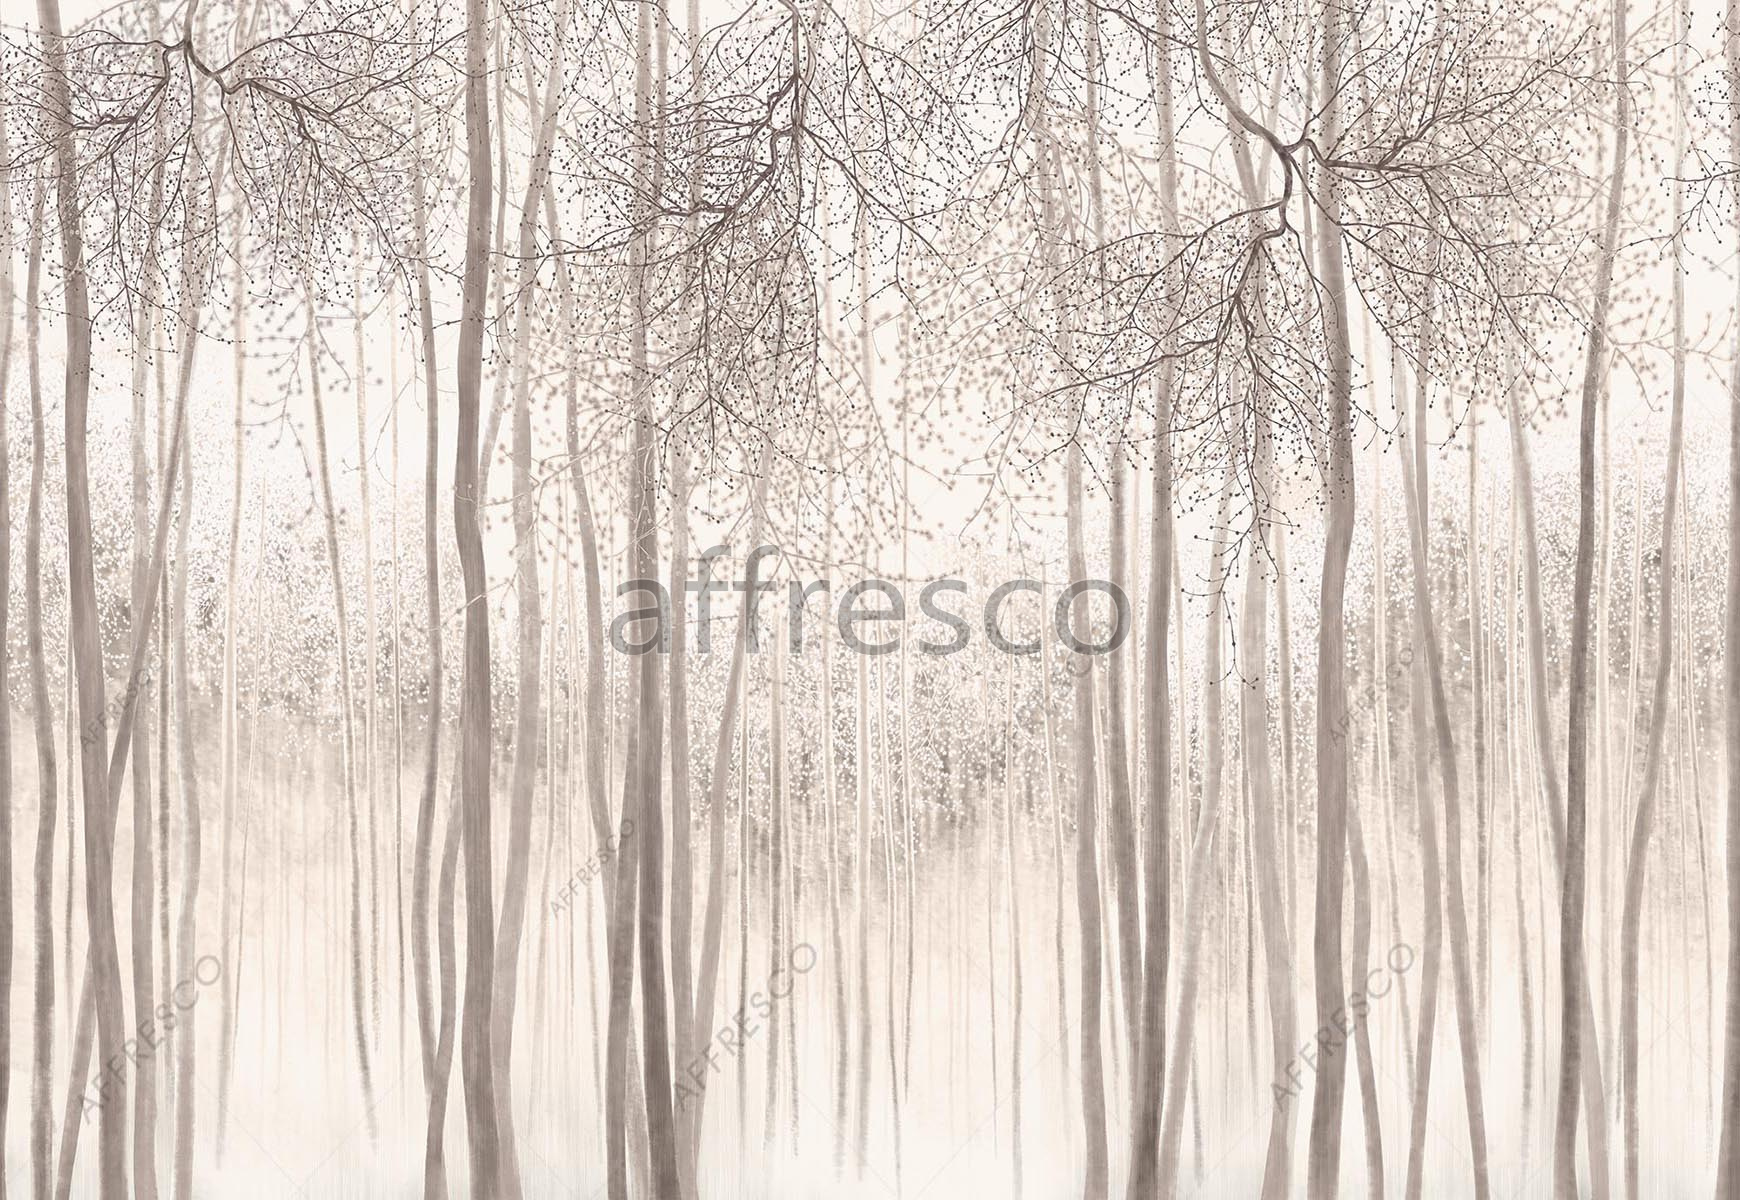 ID139257 | Forest | forest mystery | Affresco Factory